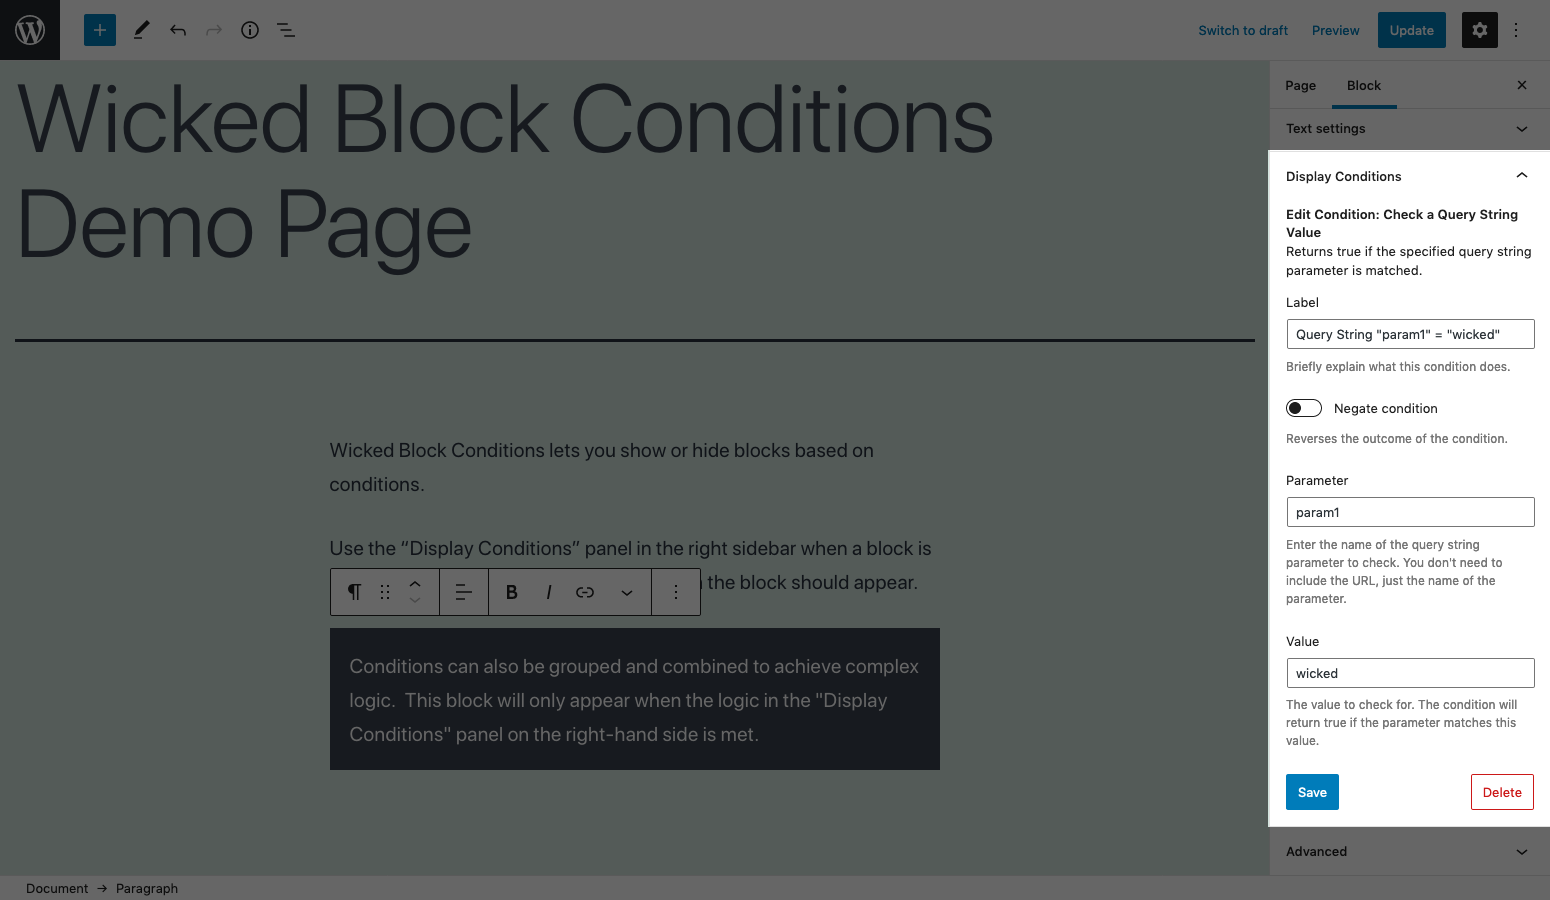 Every condition can be assigned a custom label.  You can also negate conditions.  Each condition has its own configuration settings.